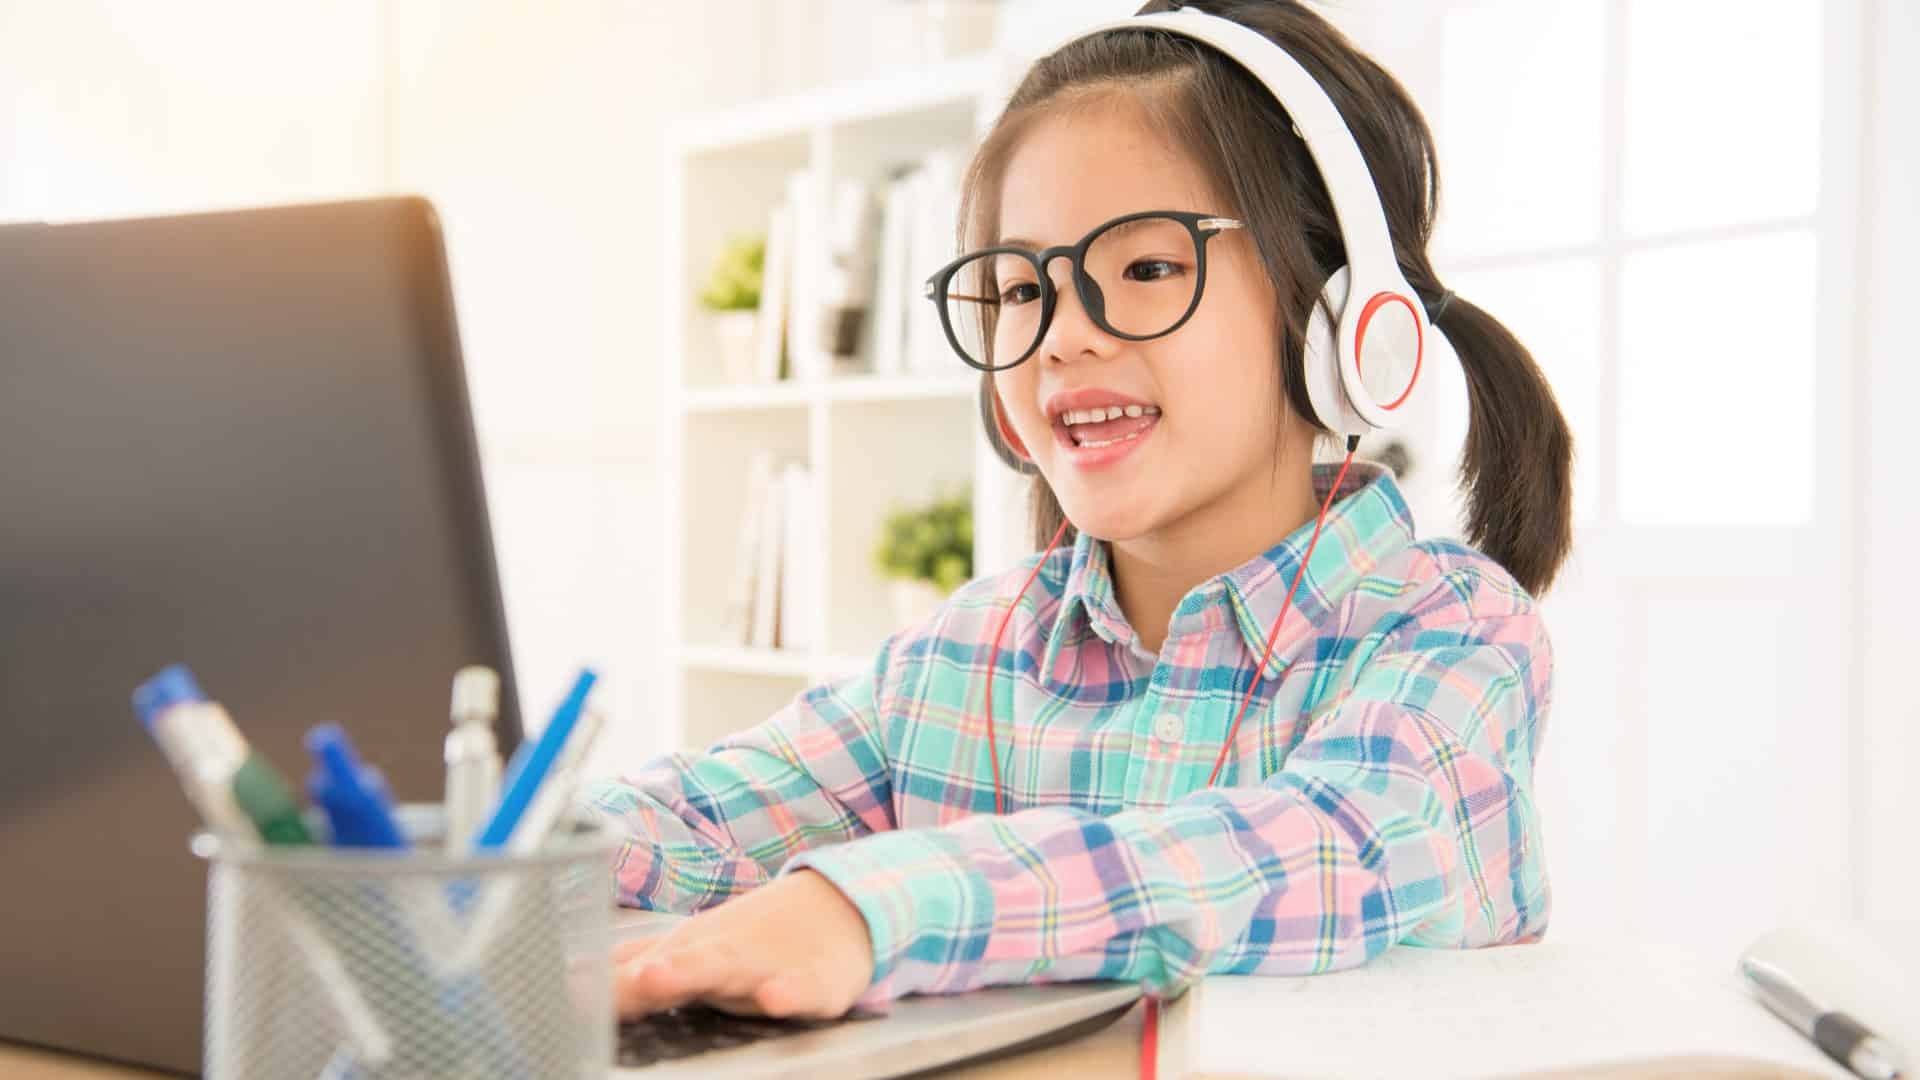 Girl with Asian roots sitting in front of a computer doing elearning and online classes using headsets